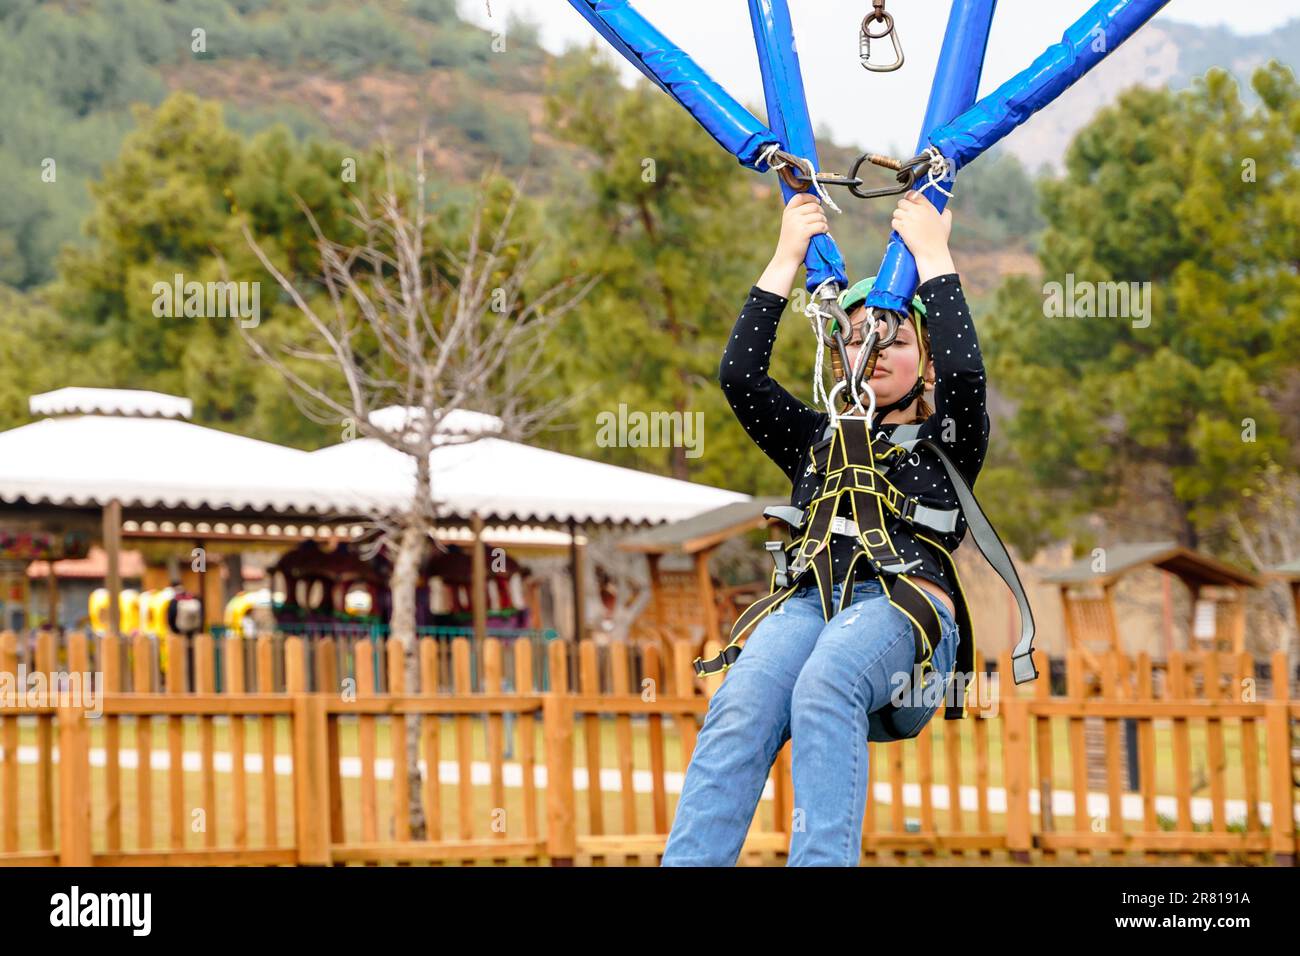 Teenage teen girl bungee flying in rope amusement park. Climbing harness equipment, green sports safety helmet. Hanging obstacle course. Kids children Stock Photo